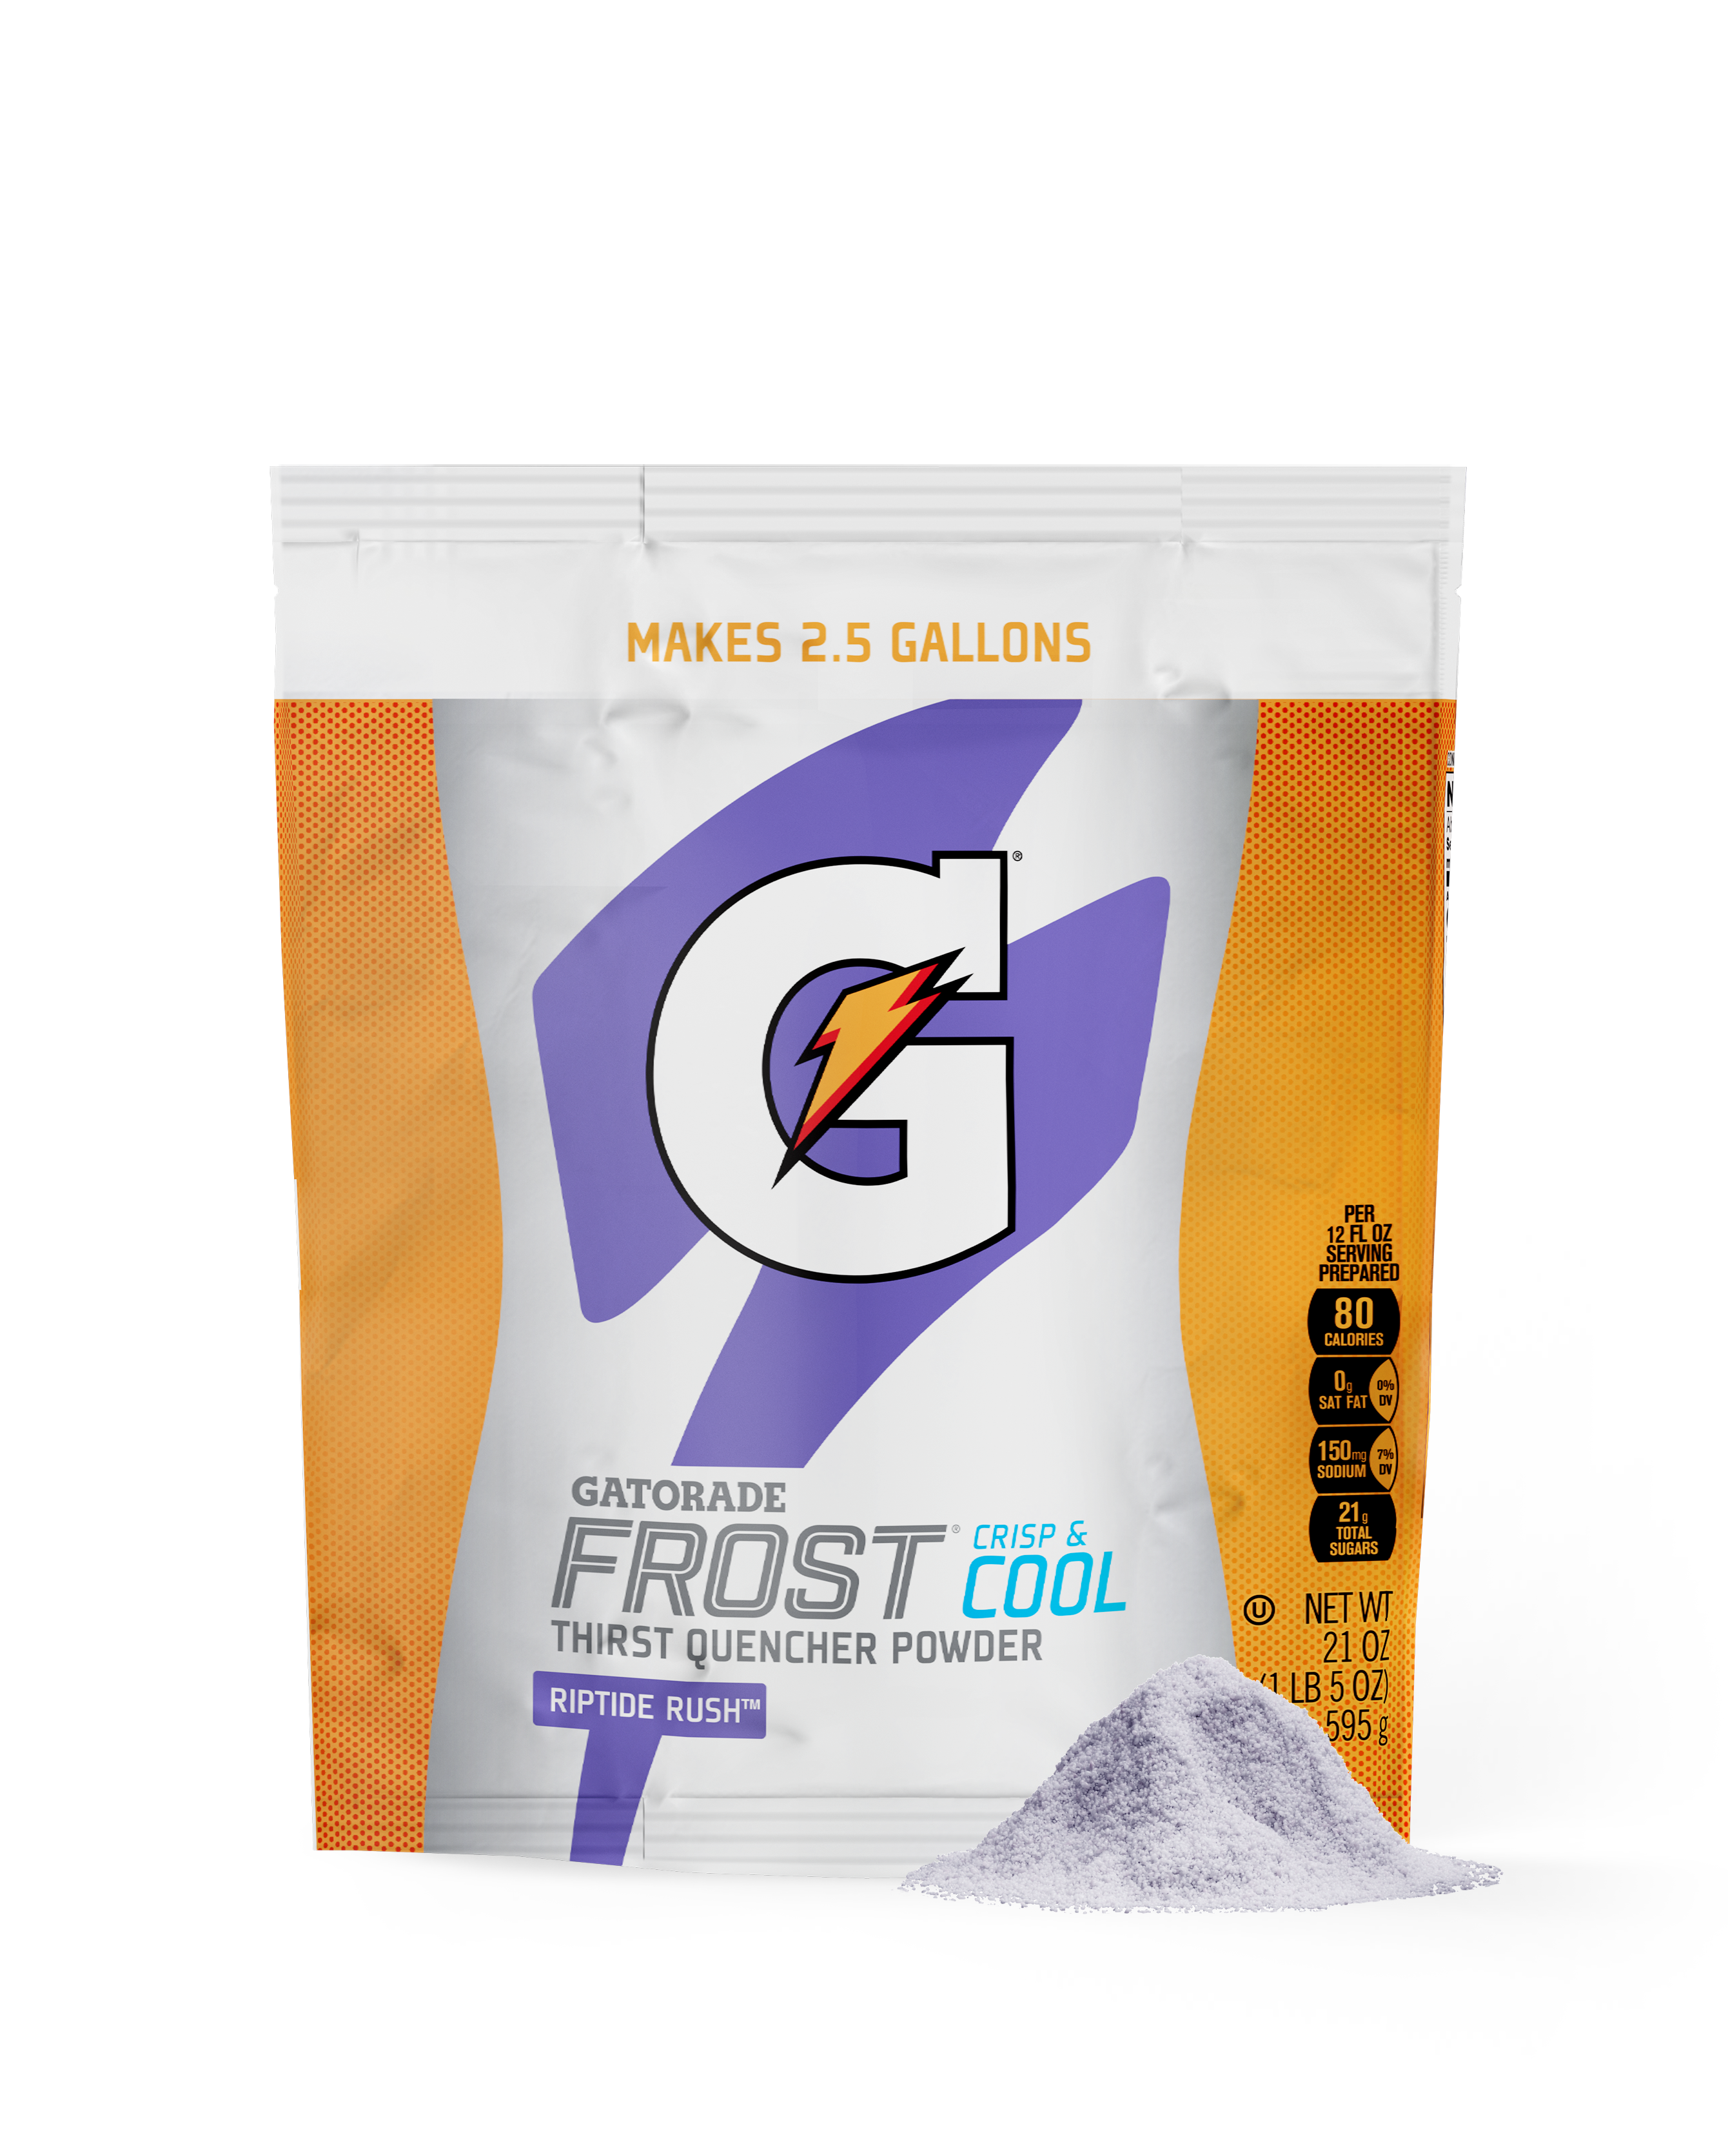 Gatorade Thirst Quencher 2.5 Gallon Bag Riptide Rush 32 Pack Product Tile